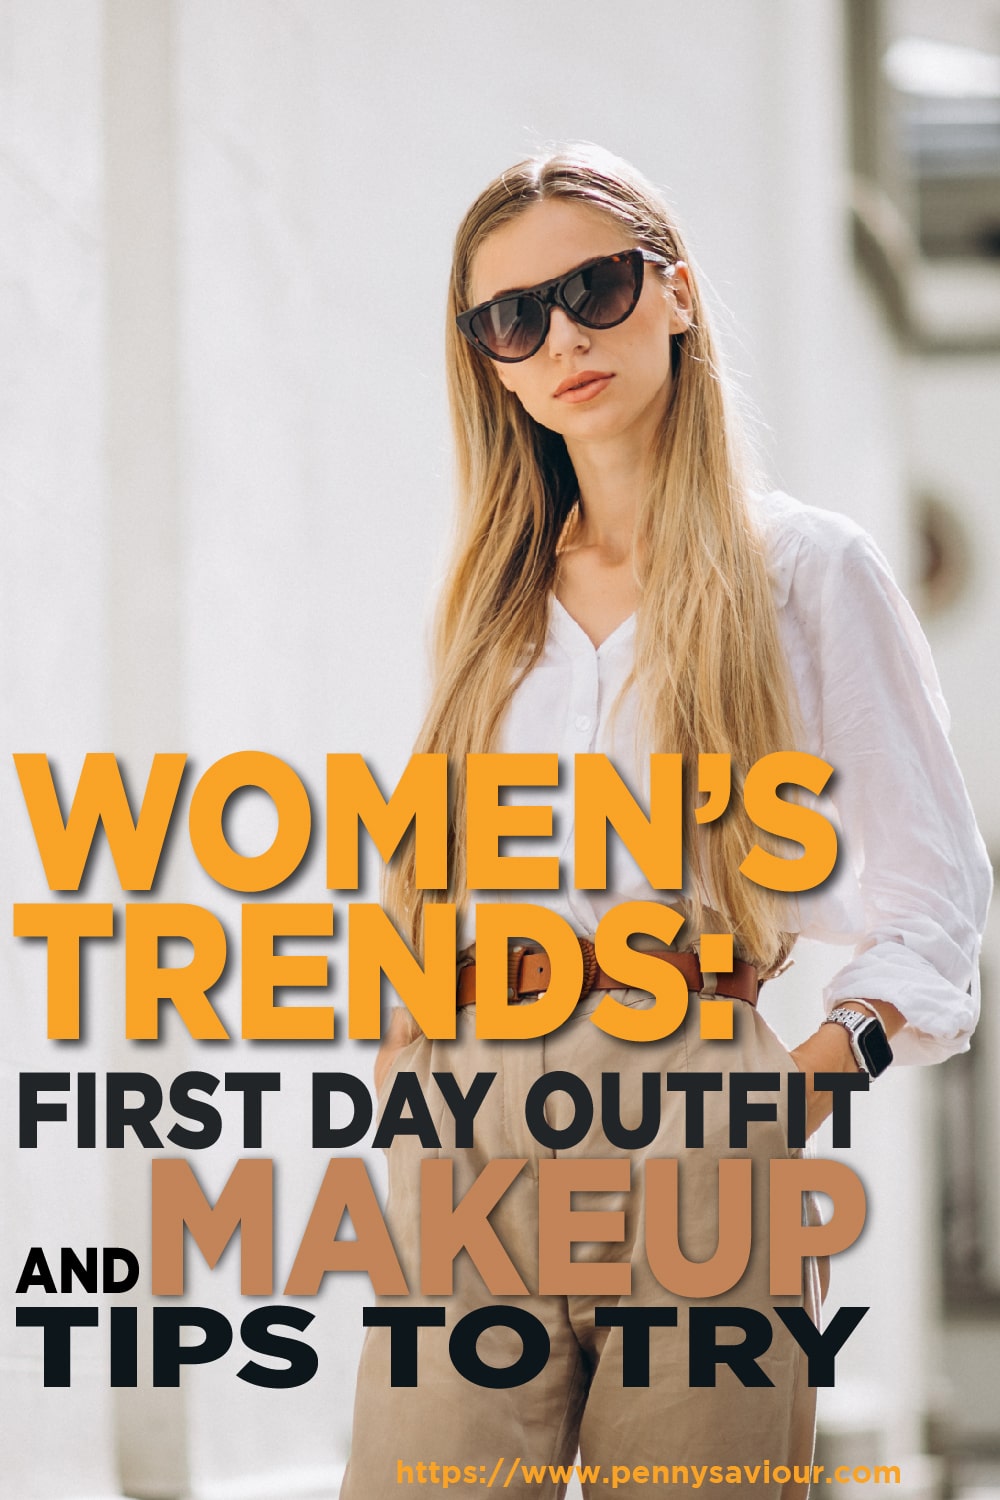 Women’s Trends: First Day Outfit And Makeup Tips To Try